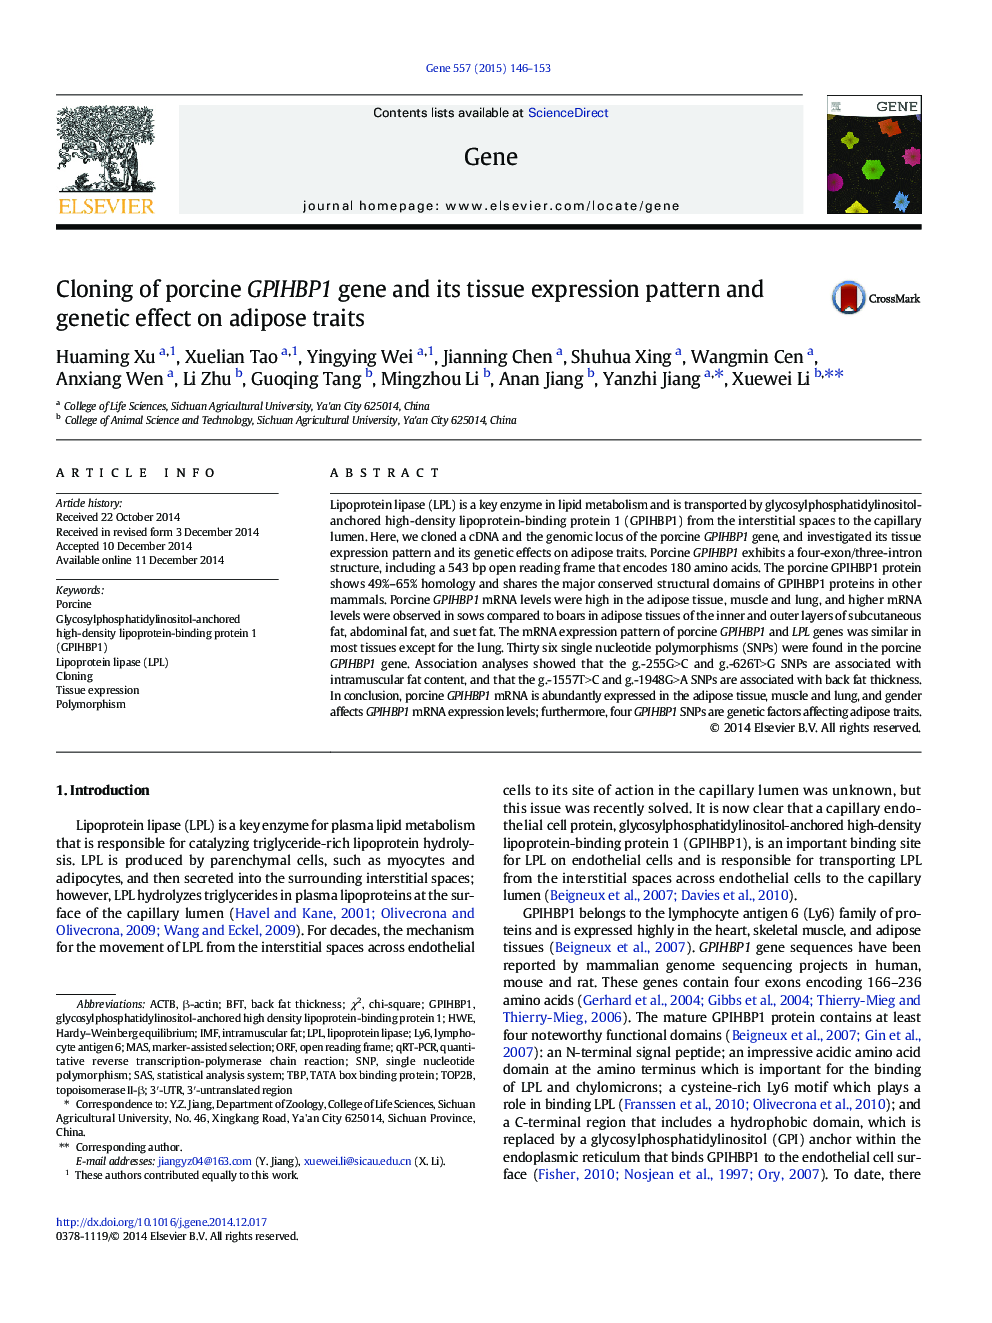 Cloning of porcine GPIHBP1 gene and its tissue expression pattern and genetic effect on adipose traits